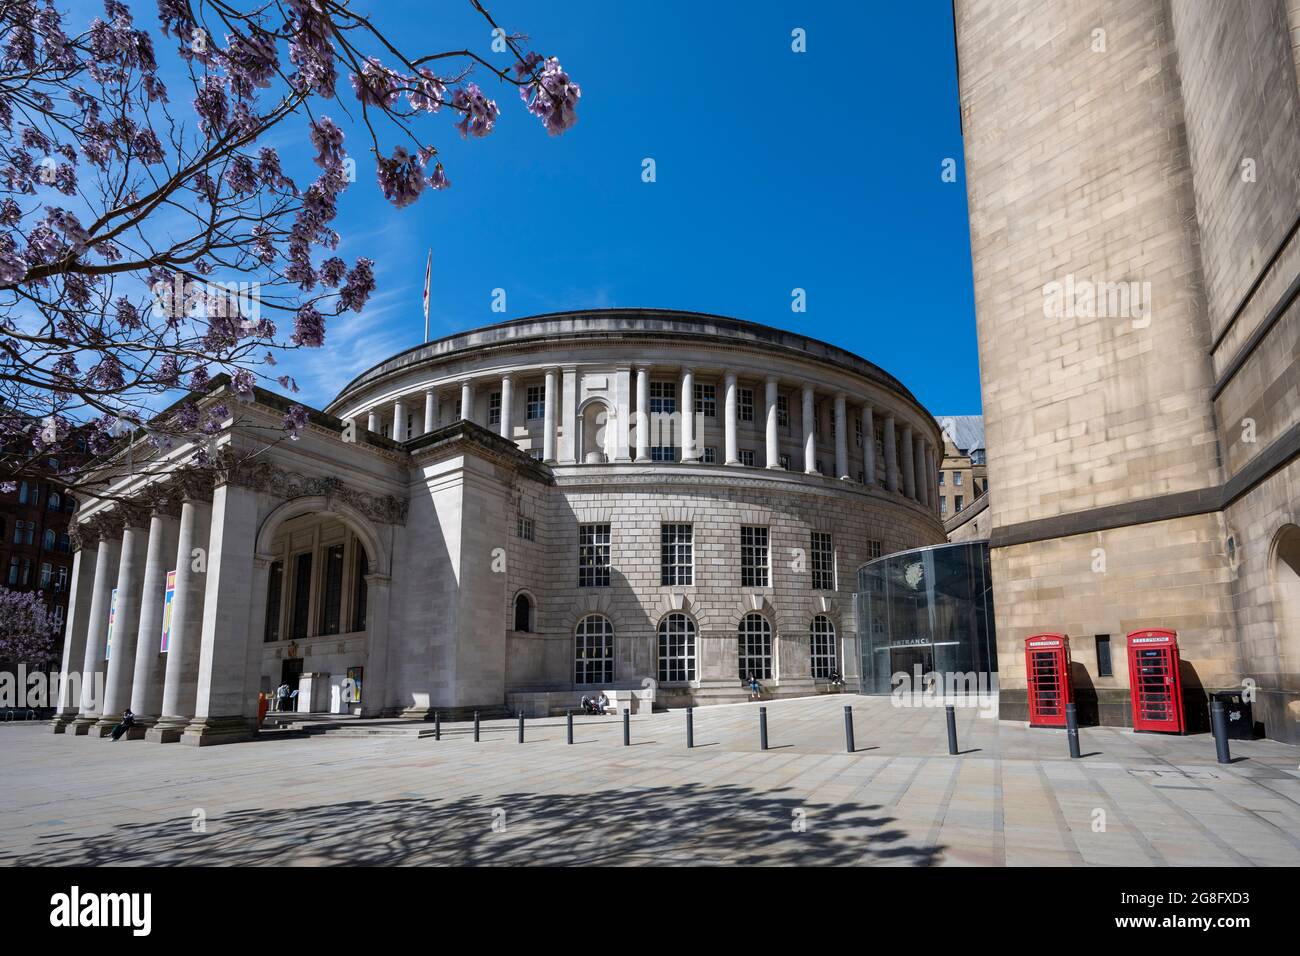 The Manchester Library, Manchester, Angleterre, Royaume-Uni, Europe Banque D'Images